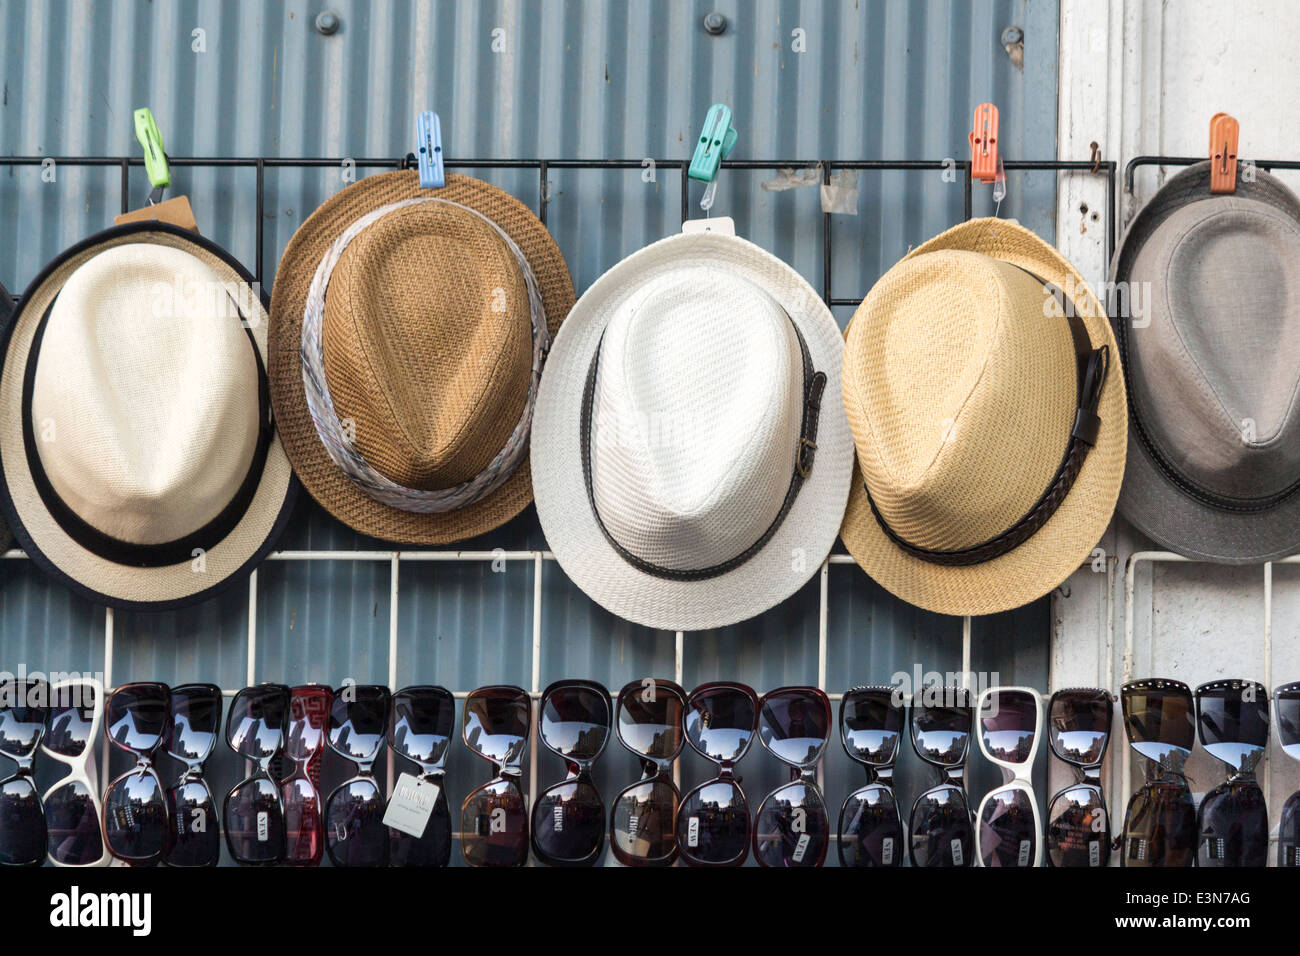 Hats and sunglasses on sale at Harbourfront on the Toronto waterfront. Stock Photo